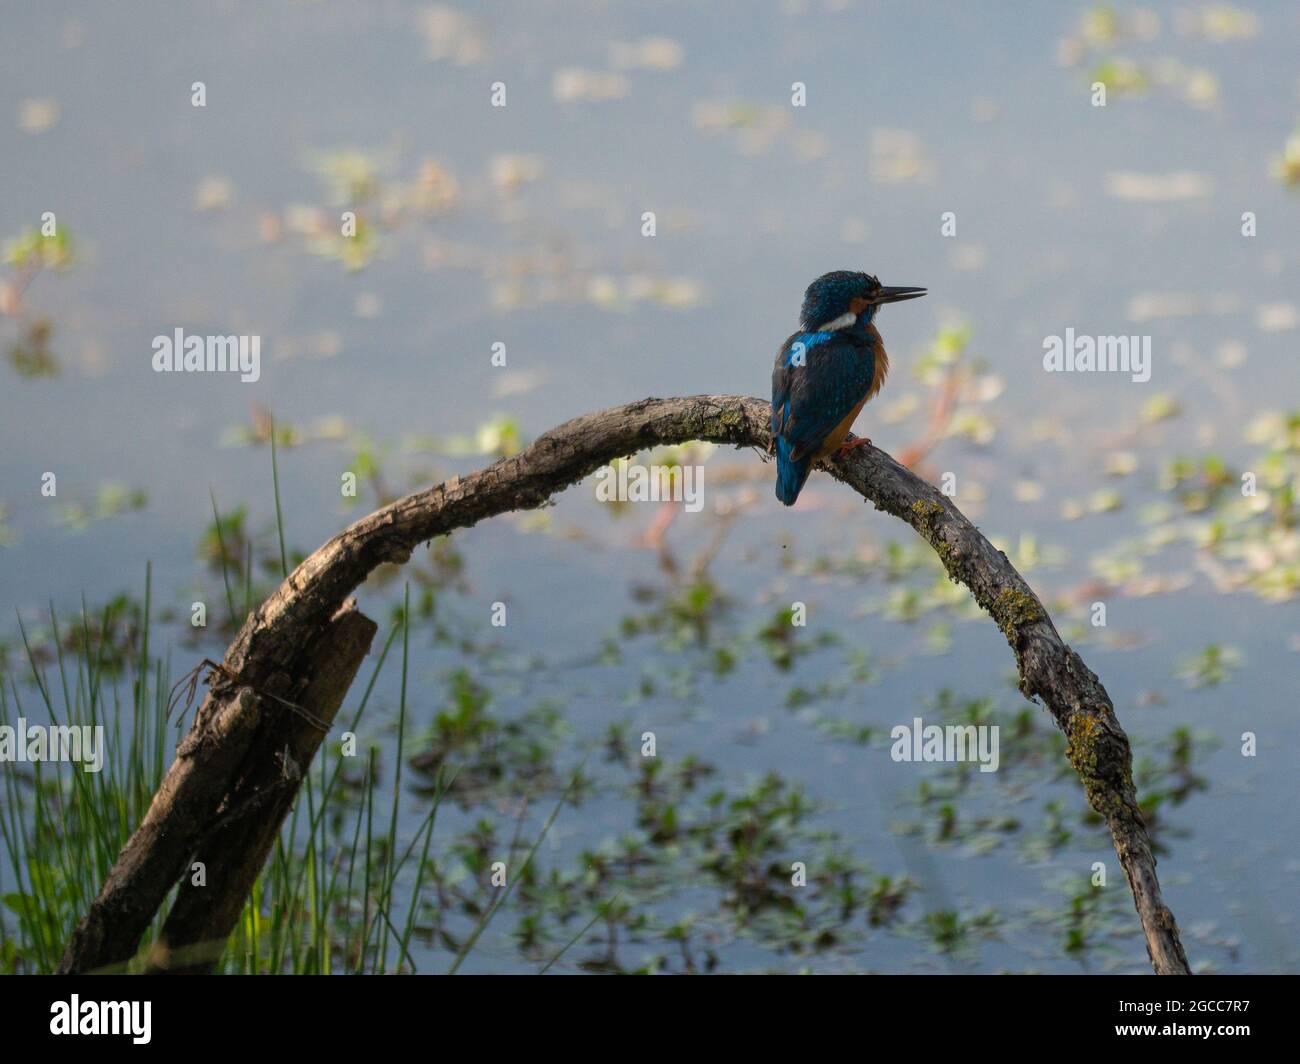 Splendid Exemplary with Beautiful Colors of Common Kingfisher, Alcedo atthis, on a Thin Branch. Stock Photo